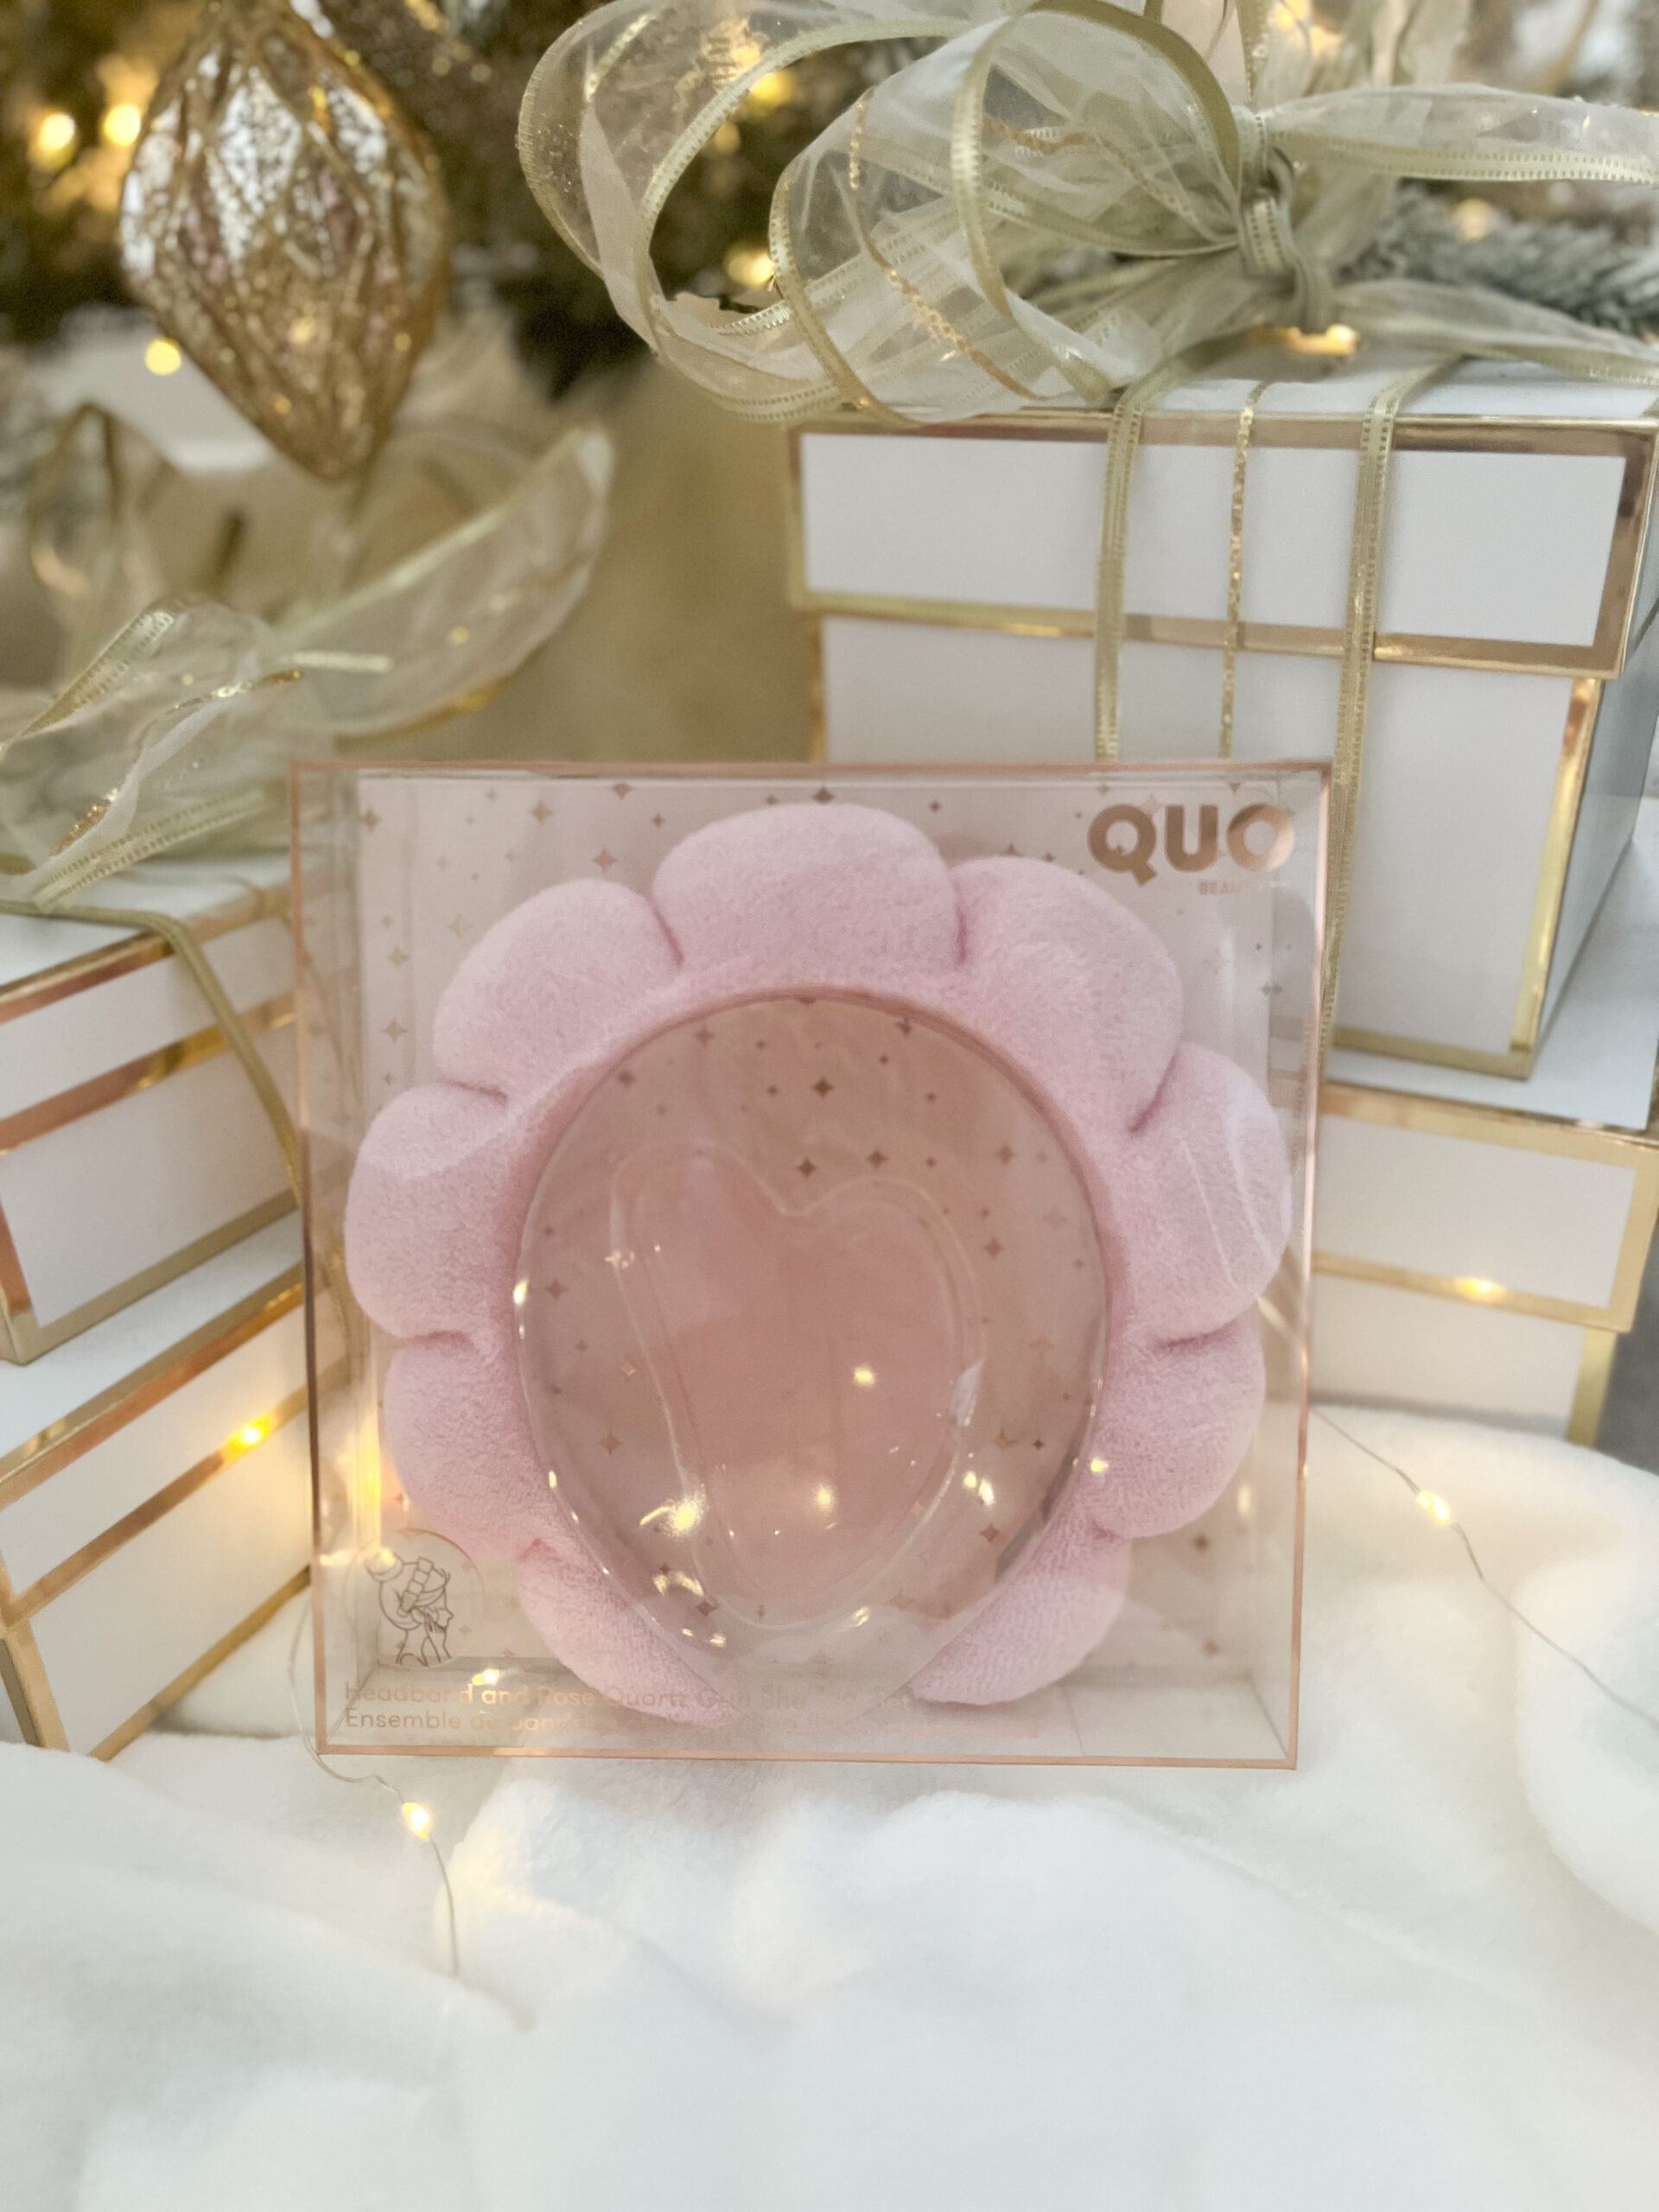 Gift Guide for Her - Livin Life with Style - Quo Beauty